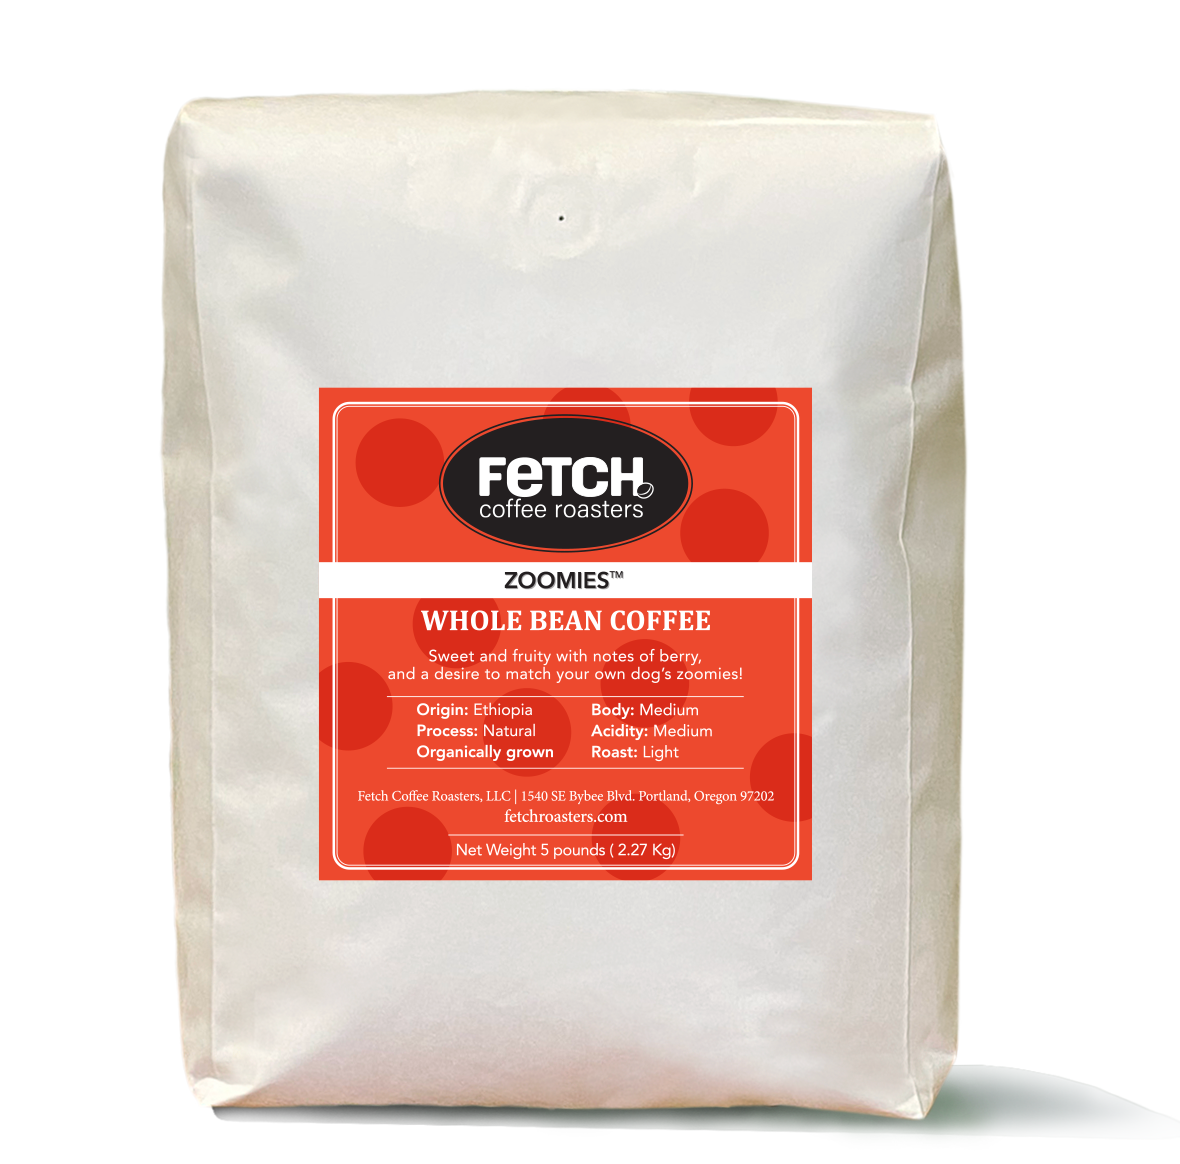 White 5 pound coffee bag with a red-orange label. The Fetch logo is at the top with a bean to the right the 'h' of the word Fetch